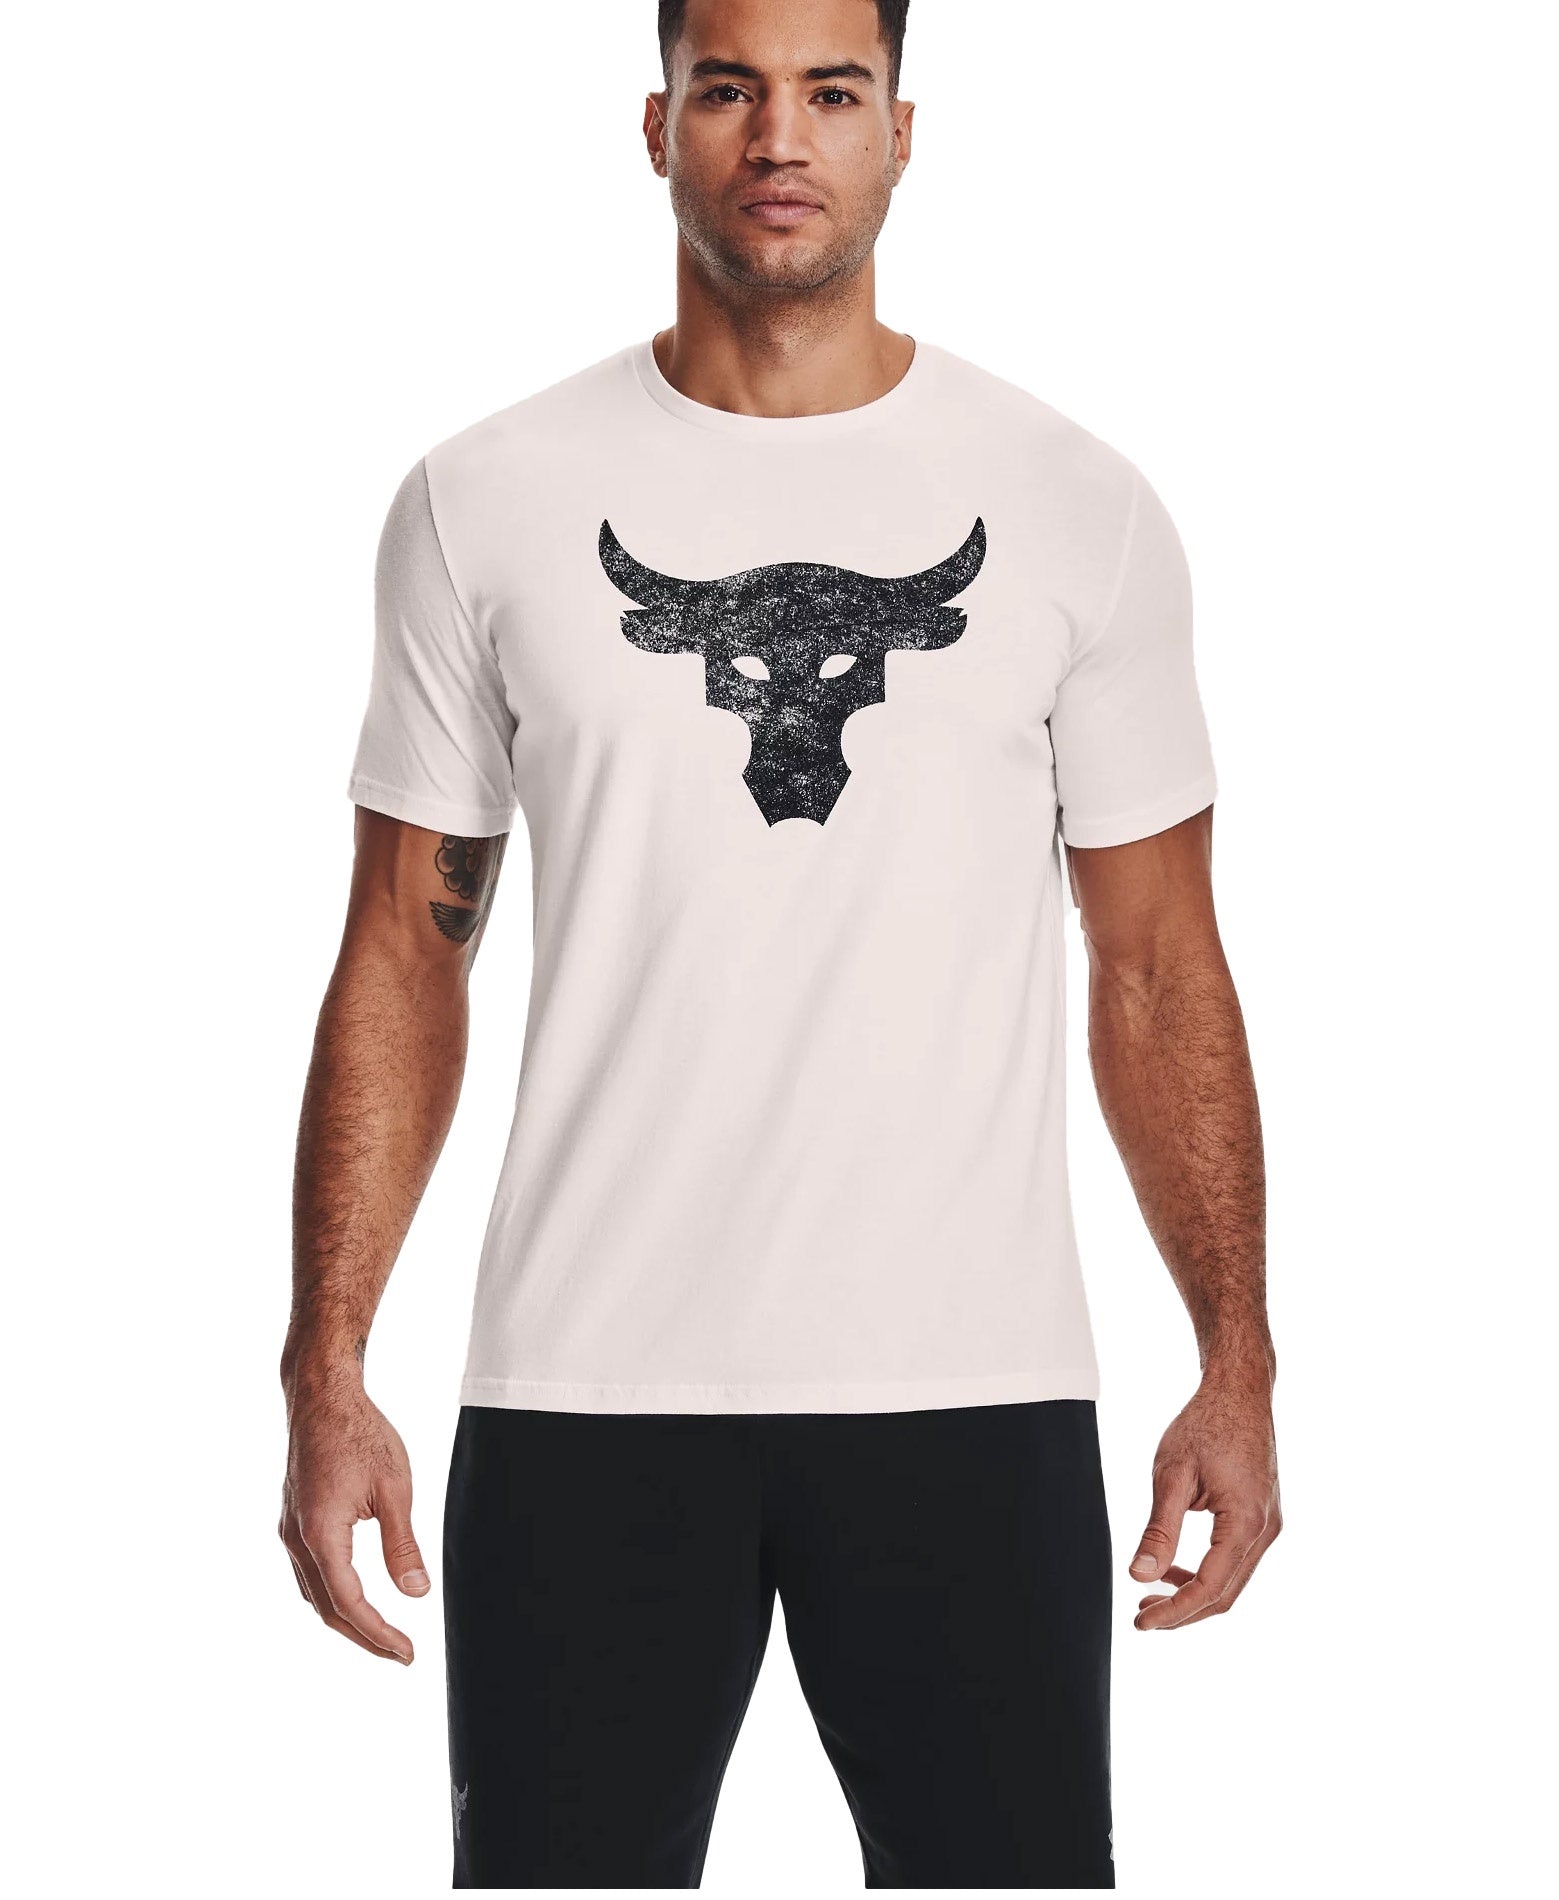 Under Armour Project Rock Brahma Bull t-shirt in black